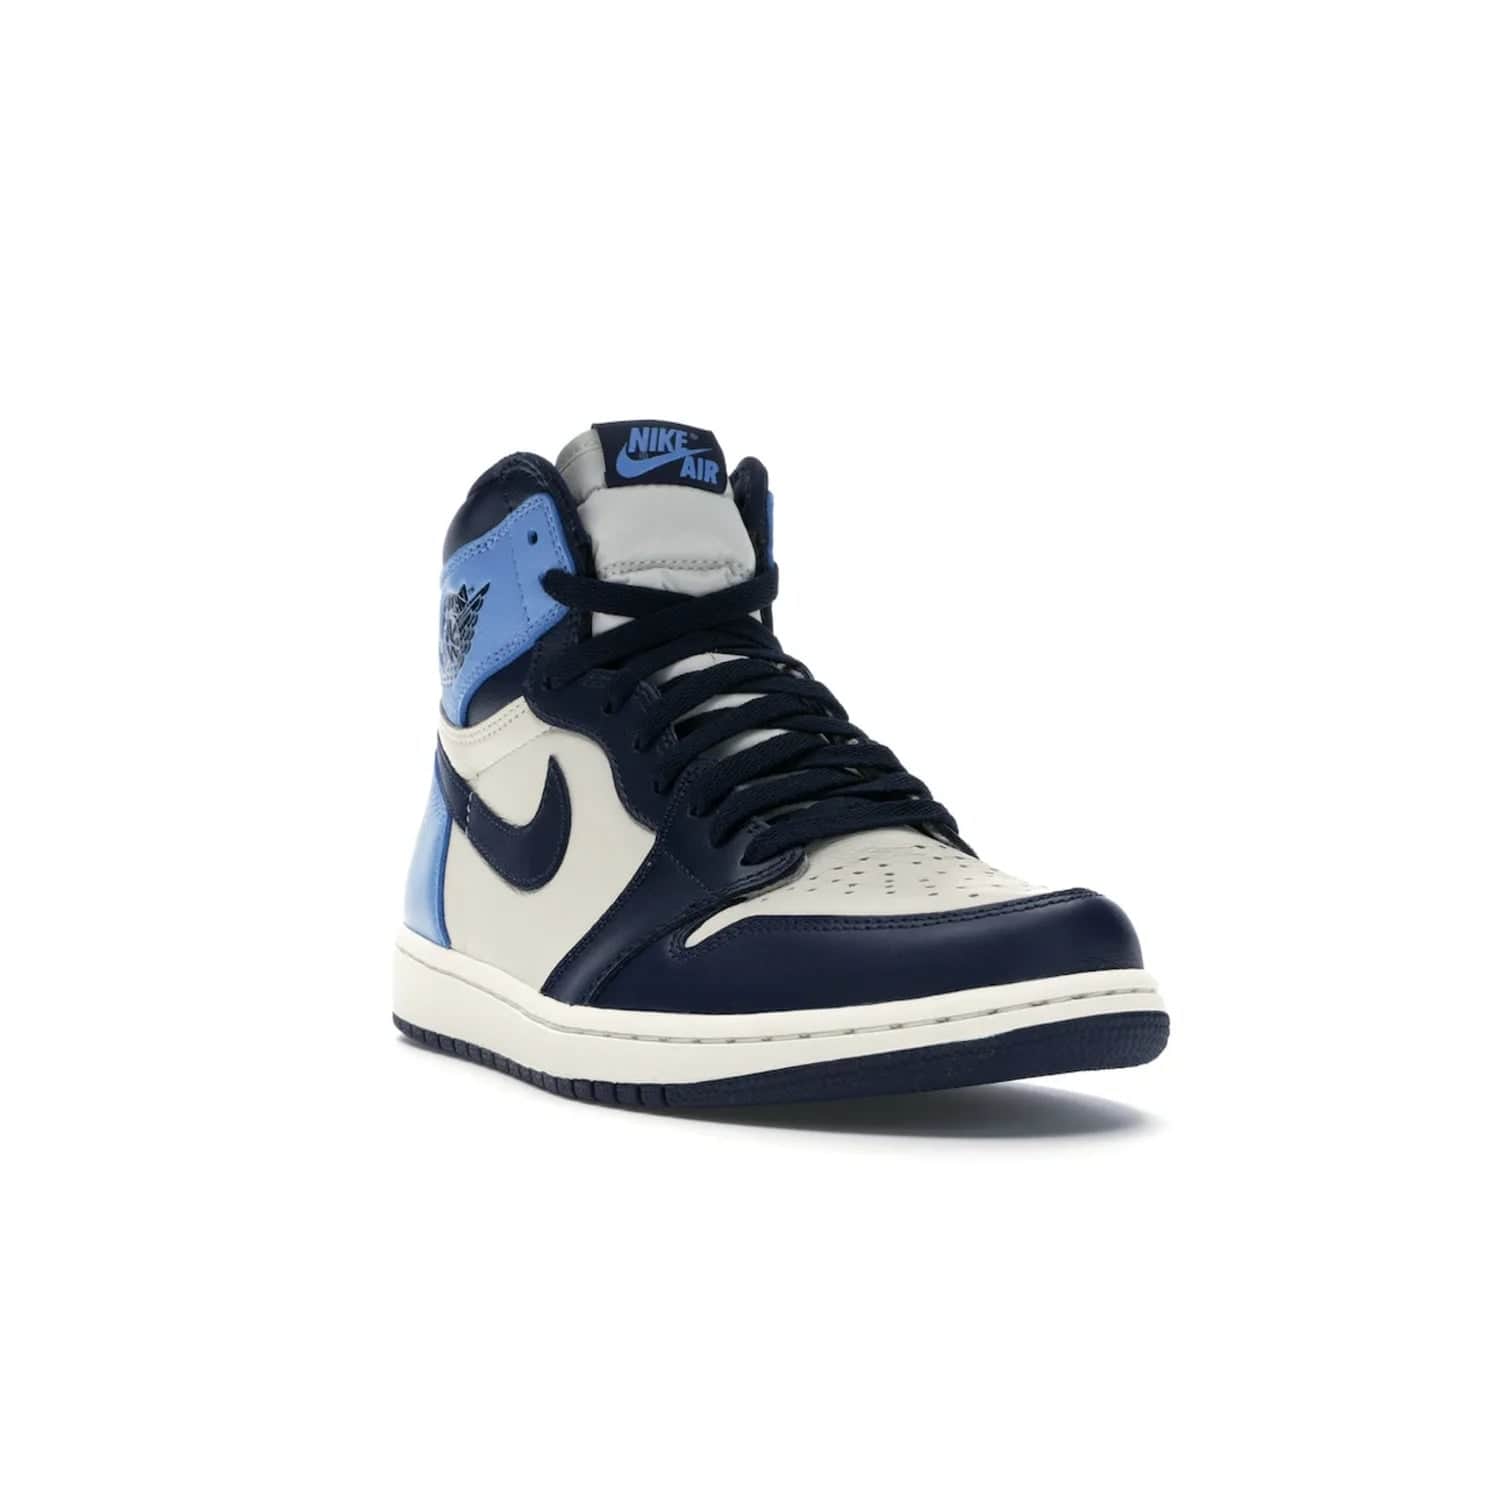 Jordan 1 Retro High Obsidian UNC - Image 7 - Only at www.BallersClubKickz.com - Bring a timeless classic to your wardrobe with the Air Jordan 1 Retro High "Obsidian/University Blue”. A full leather upper combines Obsidian and University Blue detailing for a retro Jordan style. Stitched Jumpman logo pays tribute to UNC. Experience classic style with a timeless sneaker.